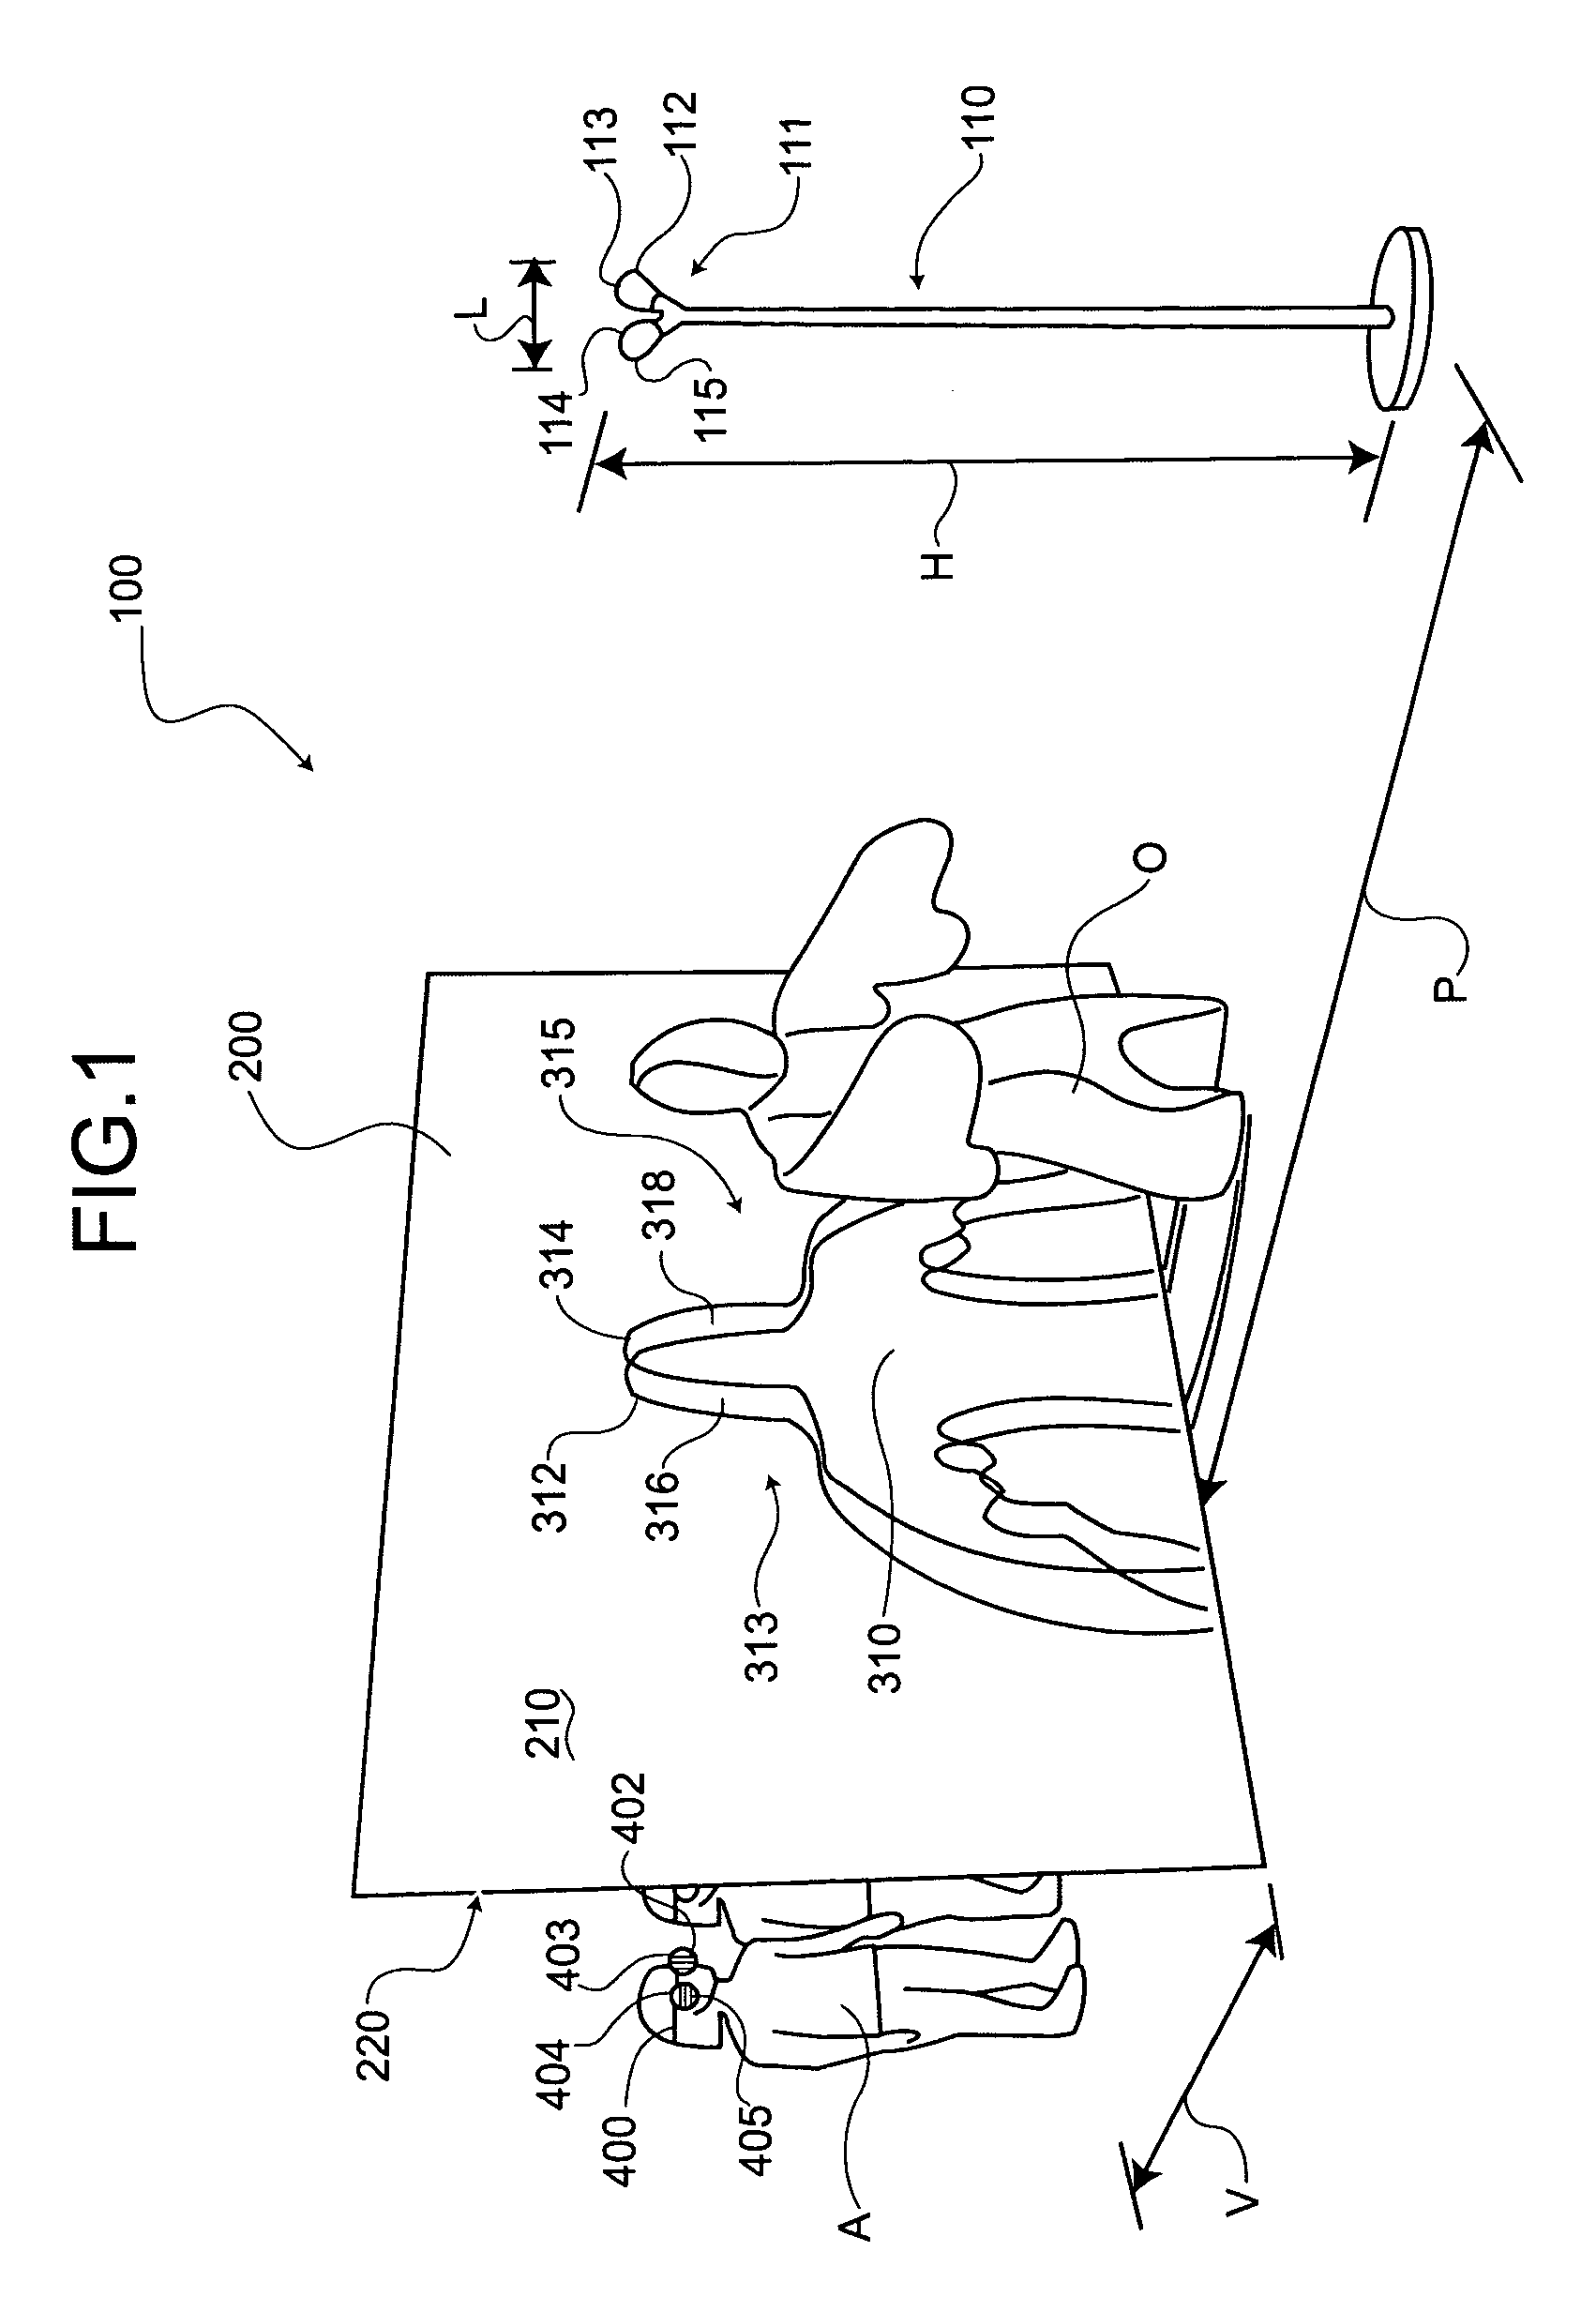 Three dimensional shadow projection system and method for home use